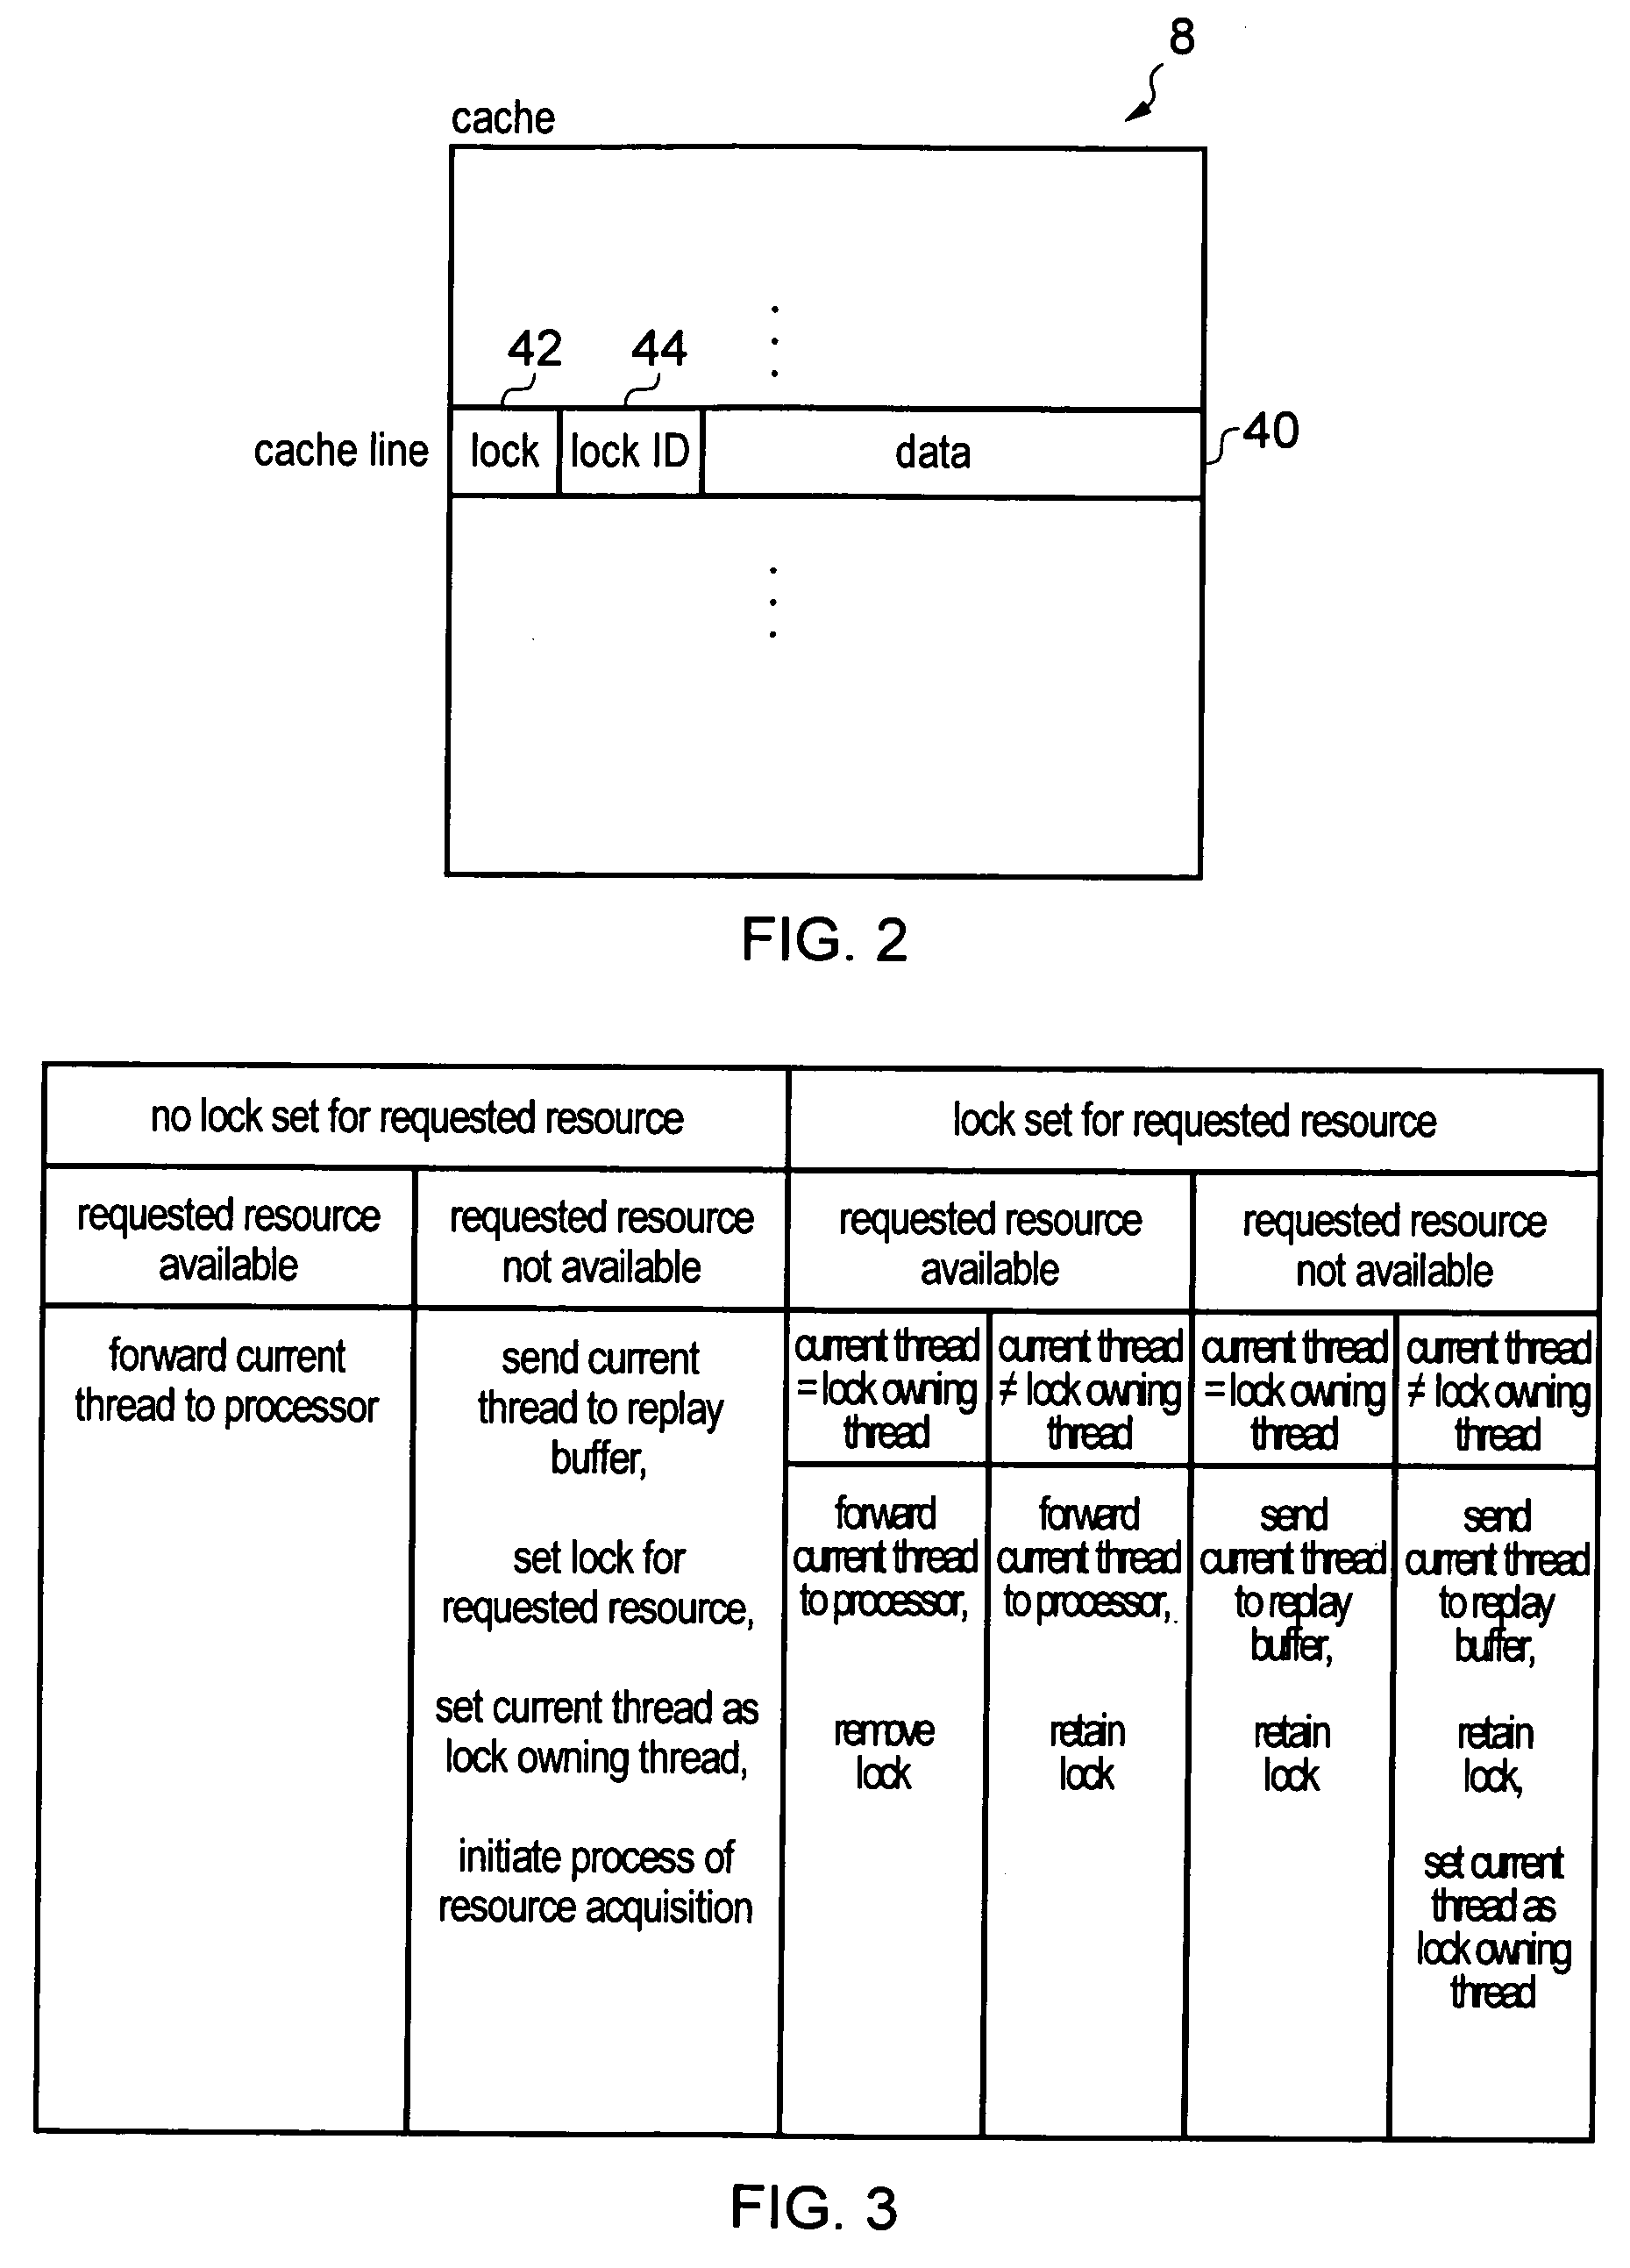 Apparatus and method for processing threads requiring resources